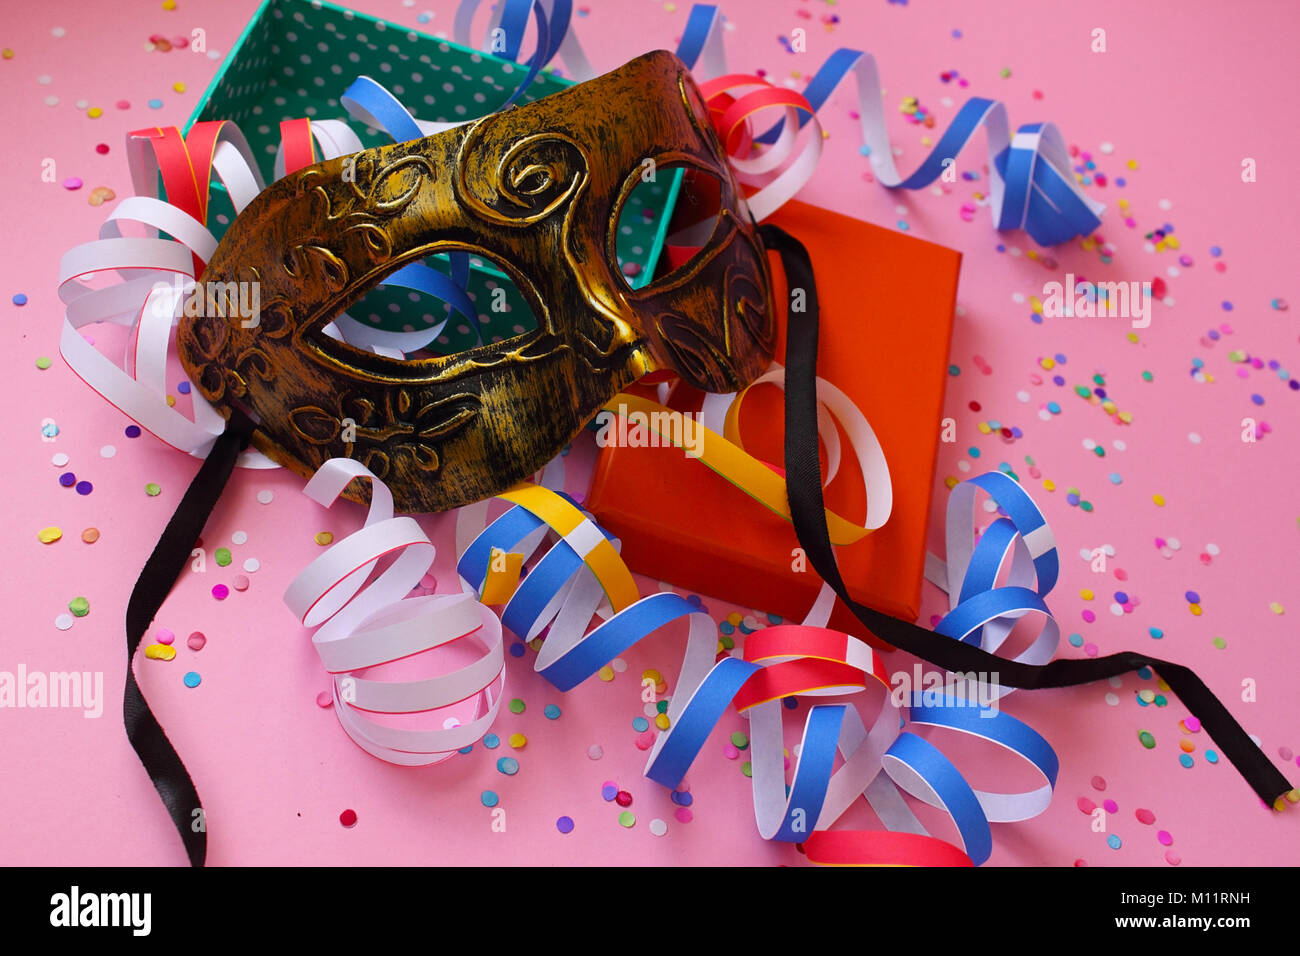 Decoration for carnival Stock Photo